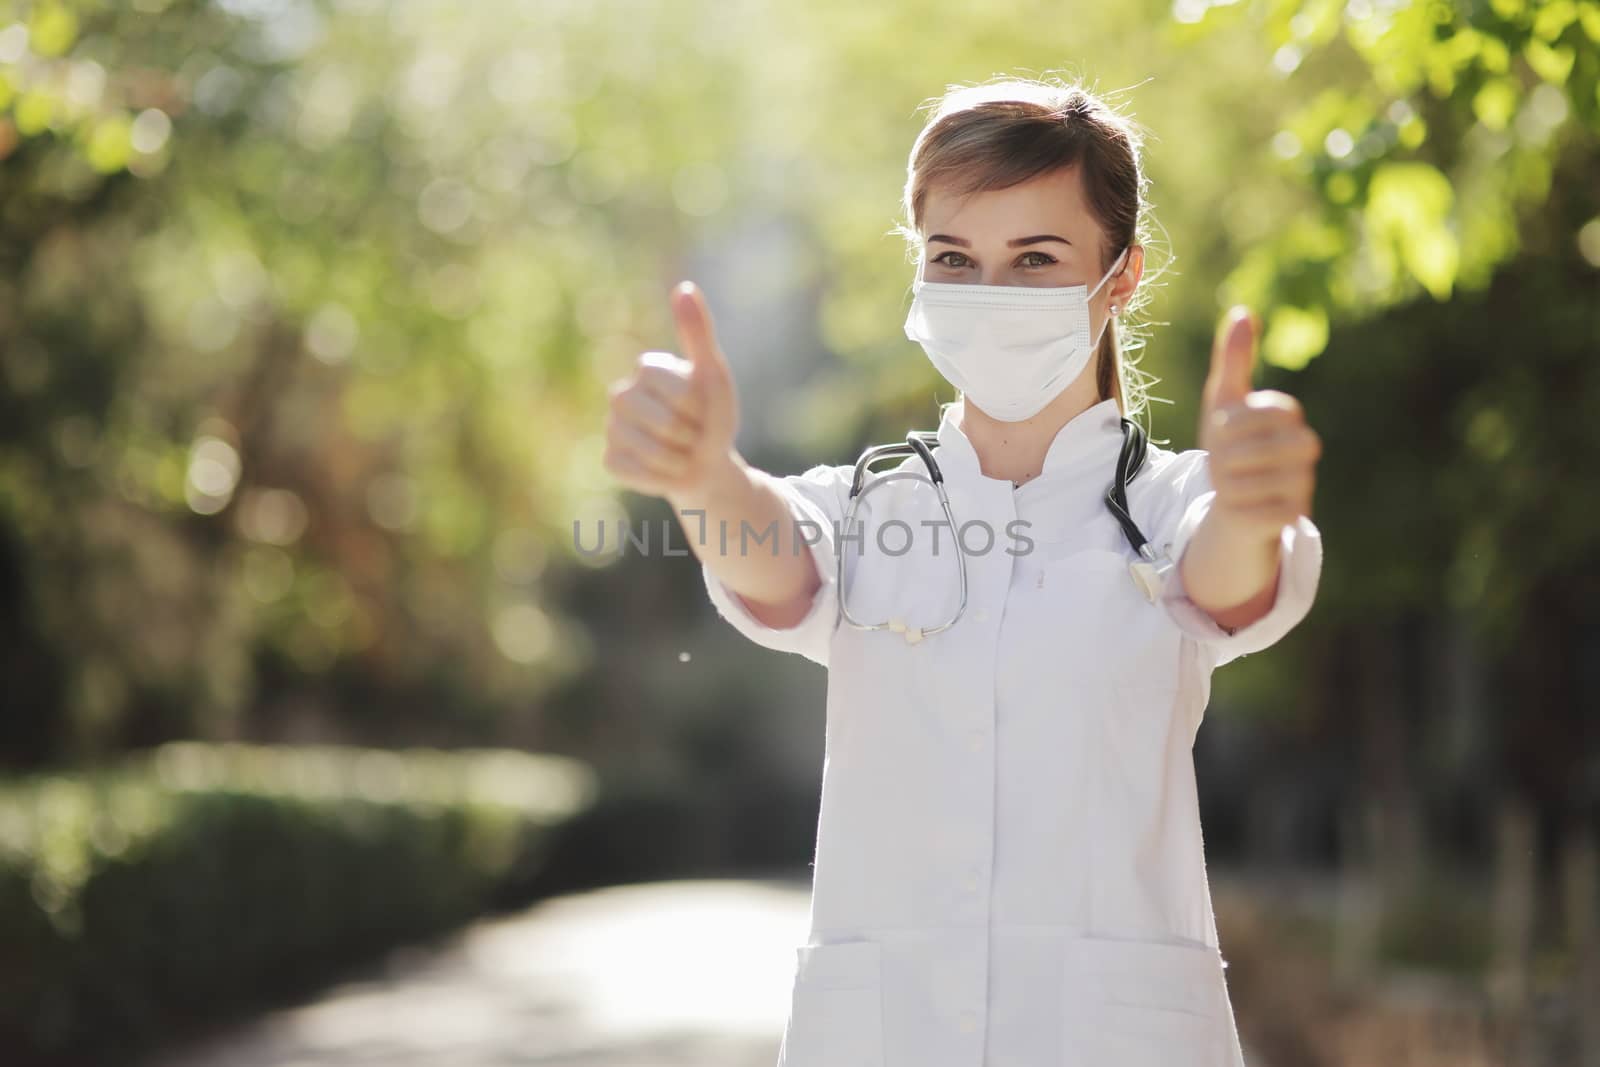 A female doctor or nurse in a protective face mask shows the class with her hand. Safety measures against the coronavirus. Prevention Covid-19 healthcare concept. Stethoscope. Woman, girl.